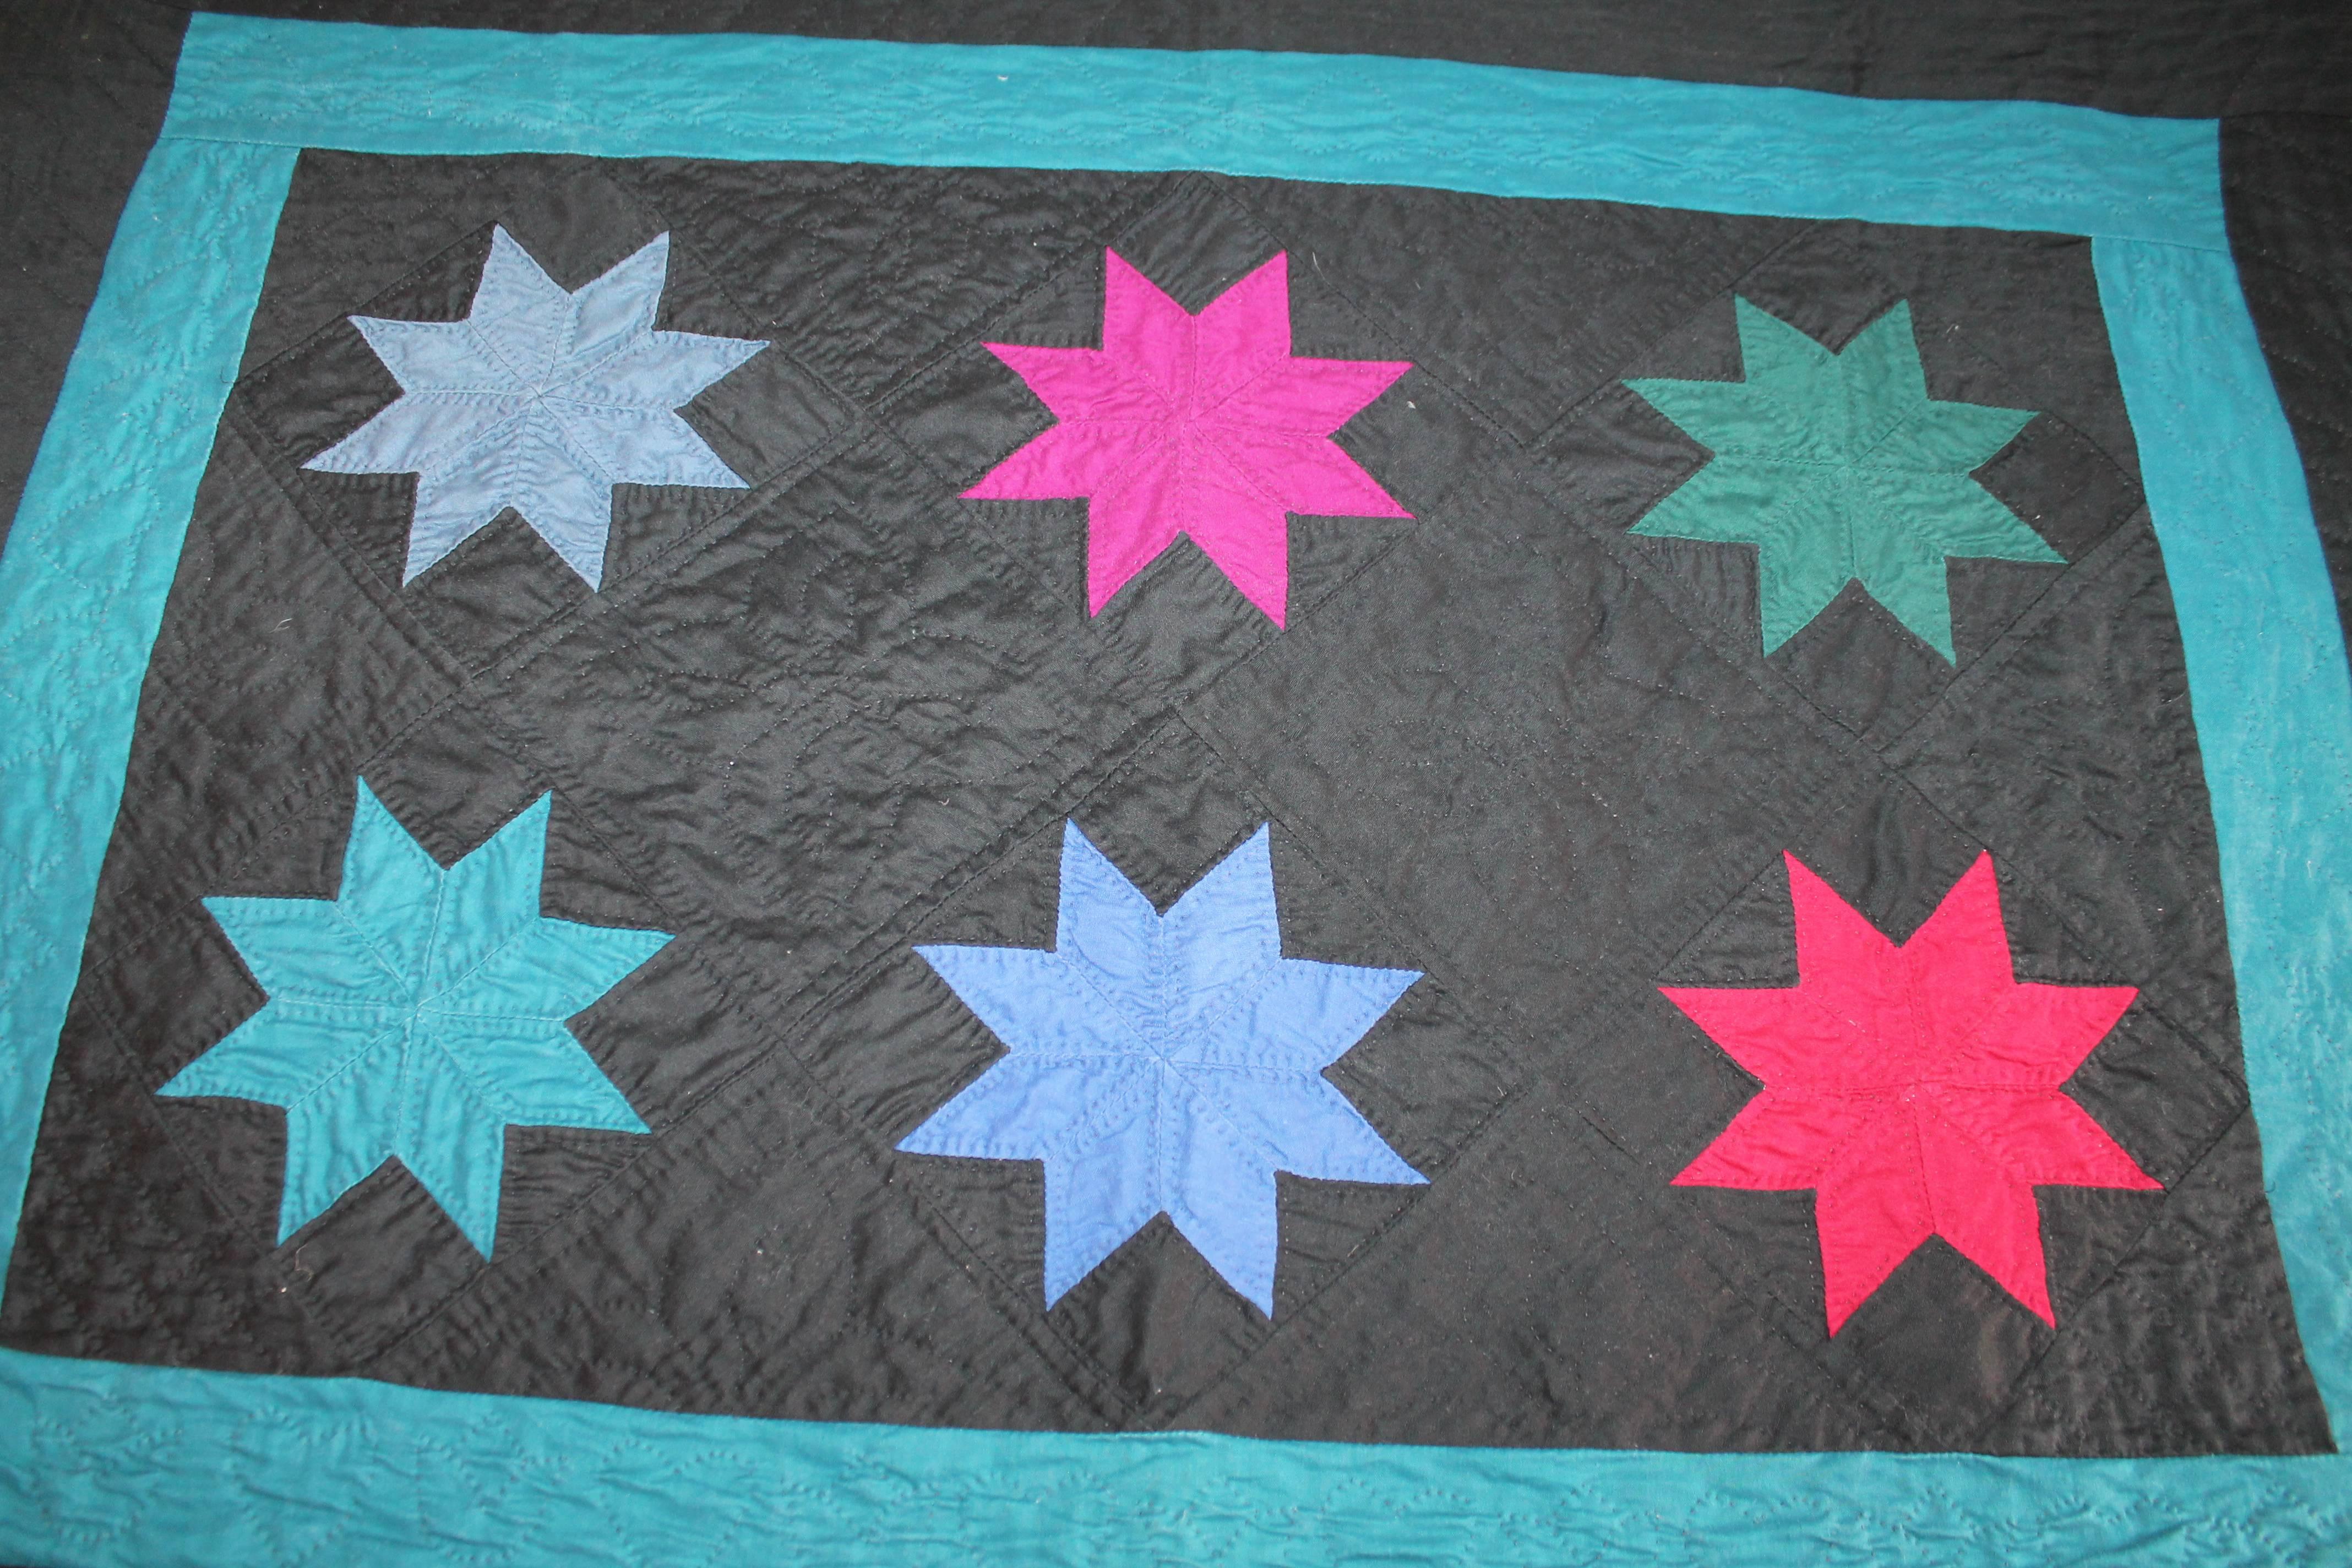 This fine Ohio Amish eight point stars is in fine condition with a grey chambray backing. This little rare gem has nice tight stitching and wonderful piece work as well. It is rare to find these forties crib quilts in fine condition. Ready for